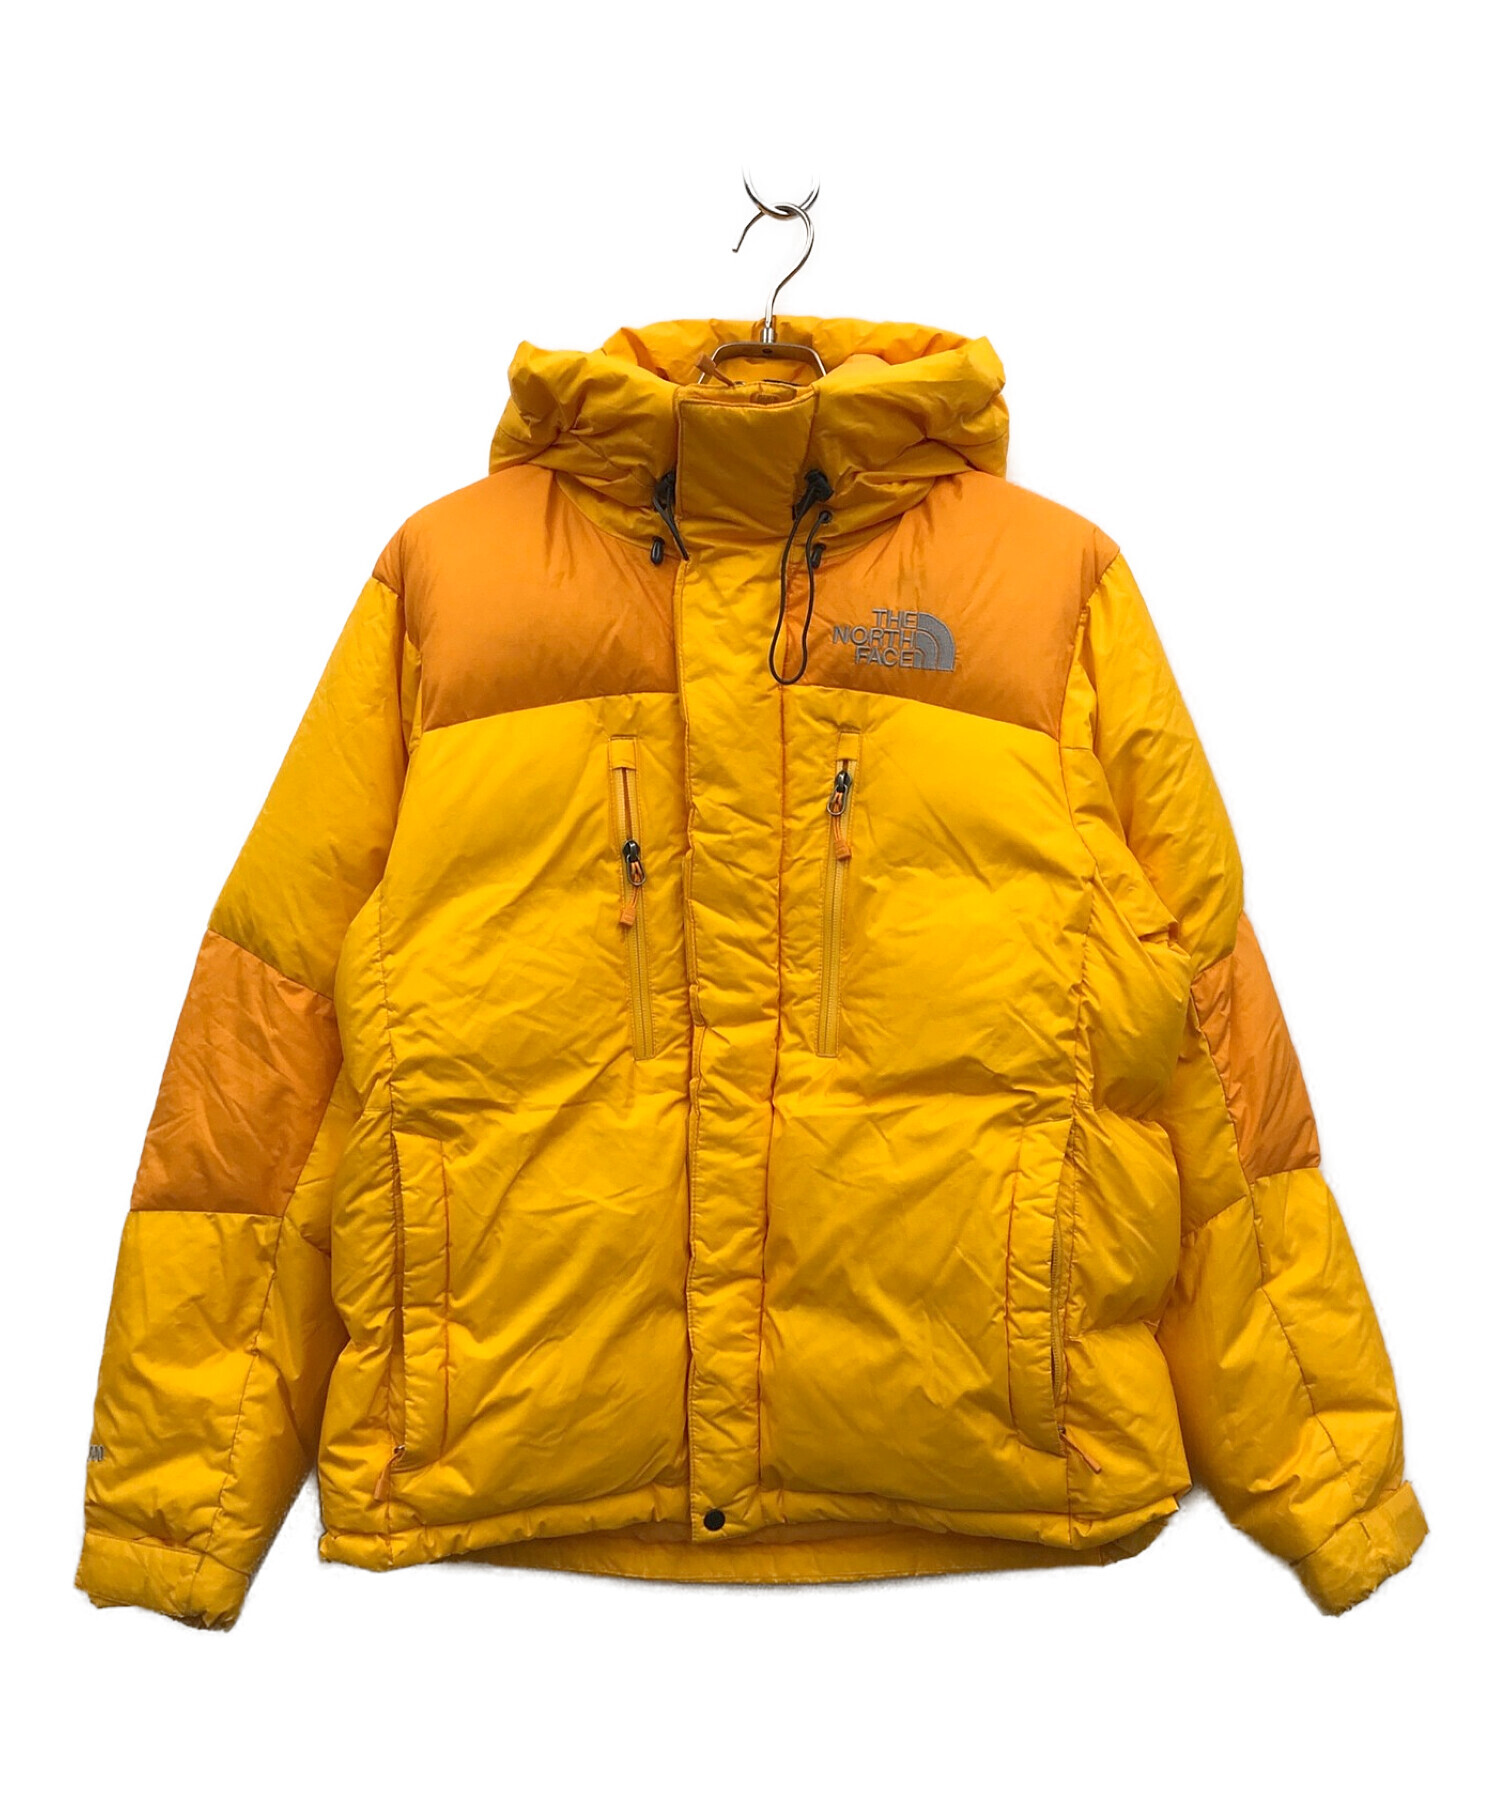 THE NORTH FACE PRISM DOWN JACKET